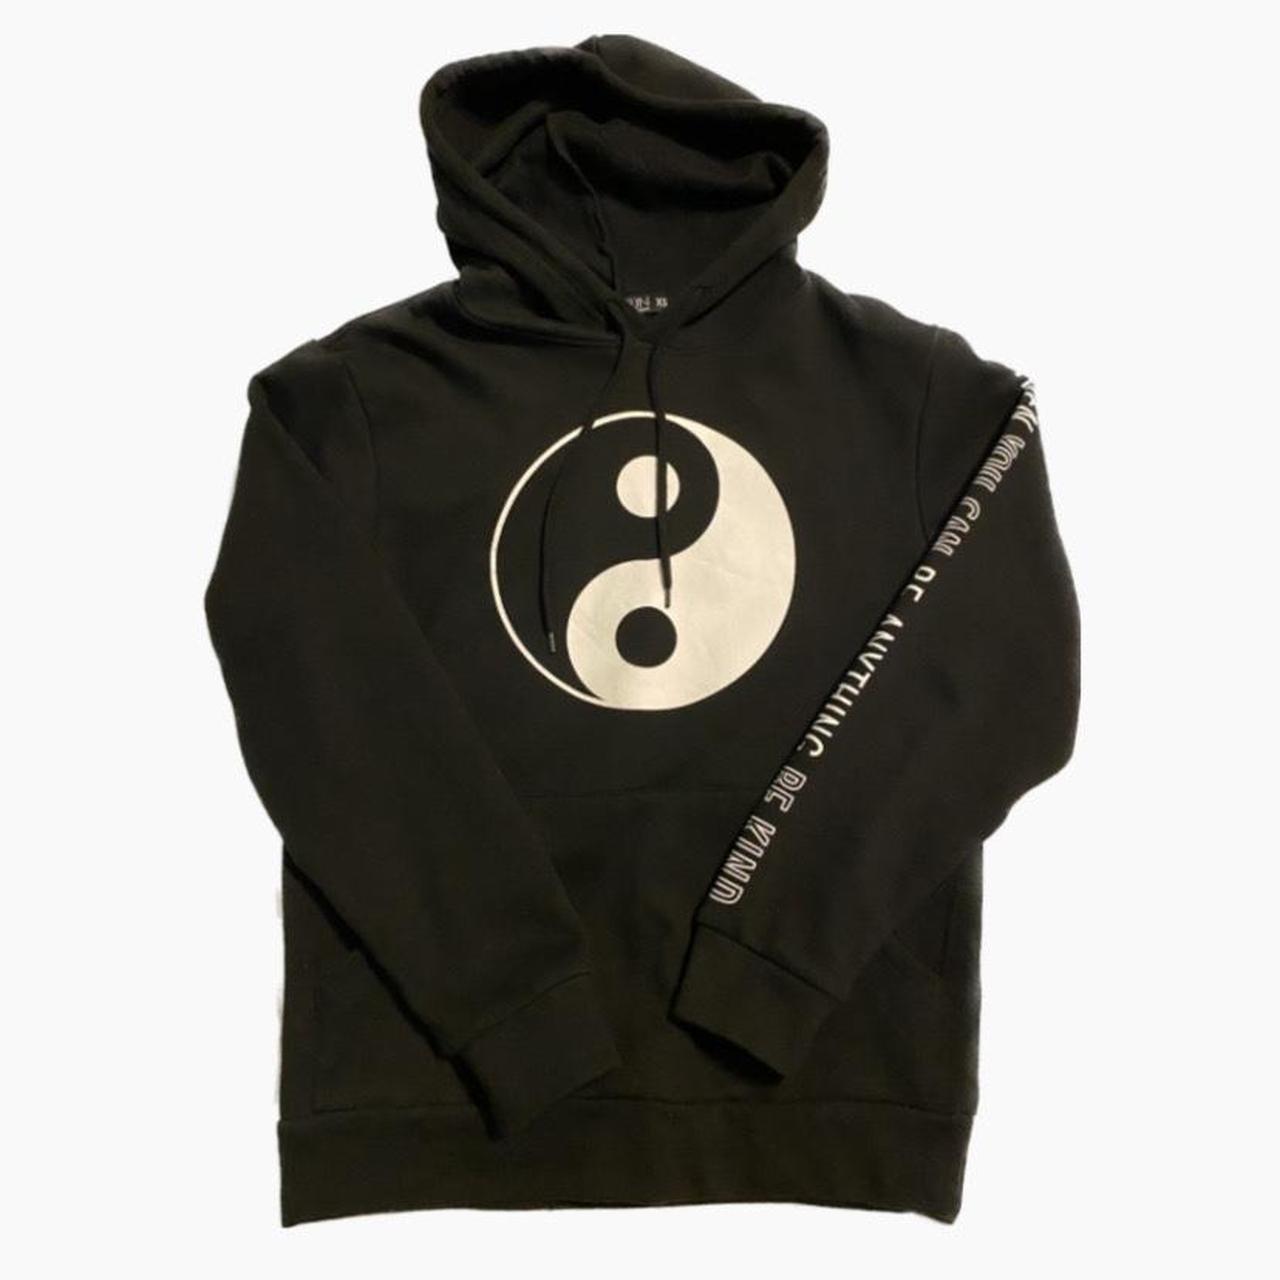 Fifth Sun Women's Black and White Hoodie